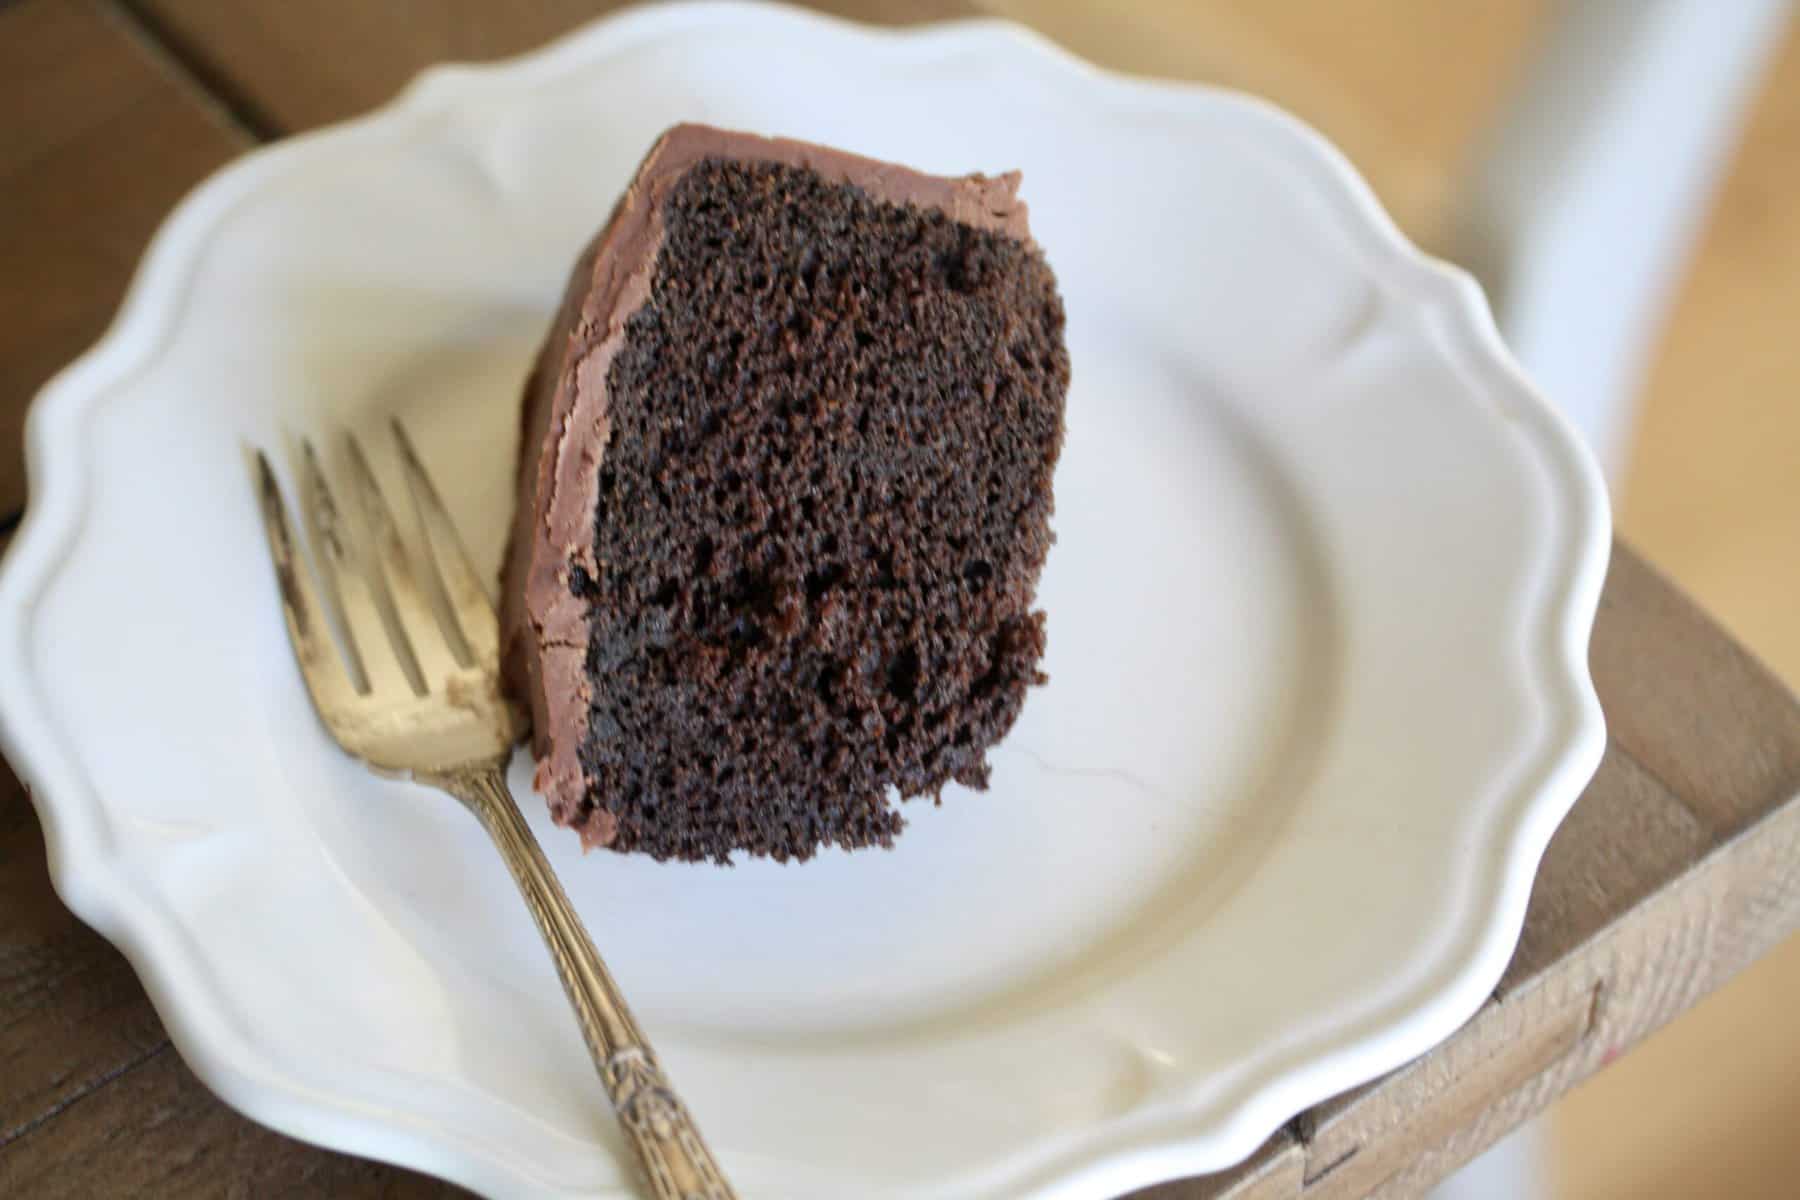 A slice of gluten free chocolate cake on a white plate.